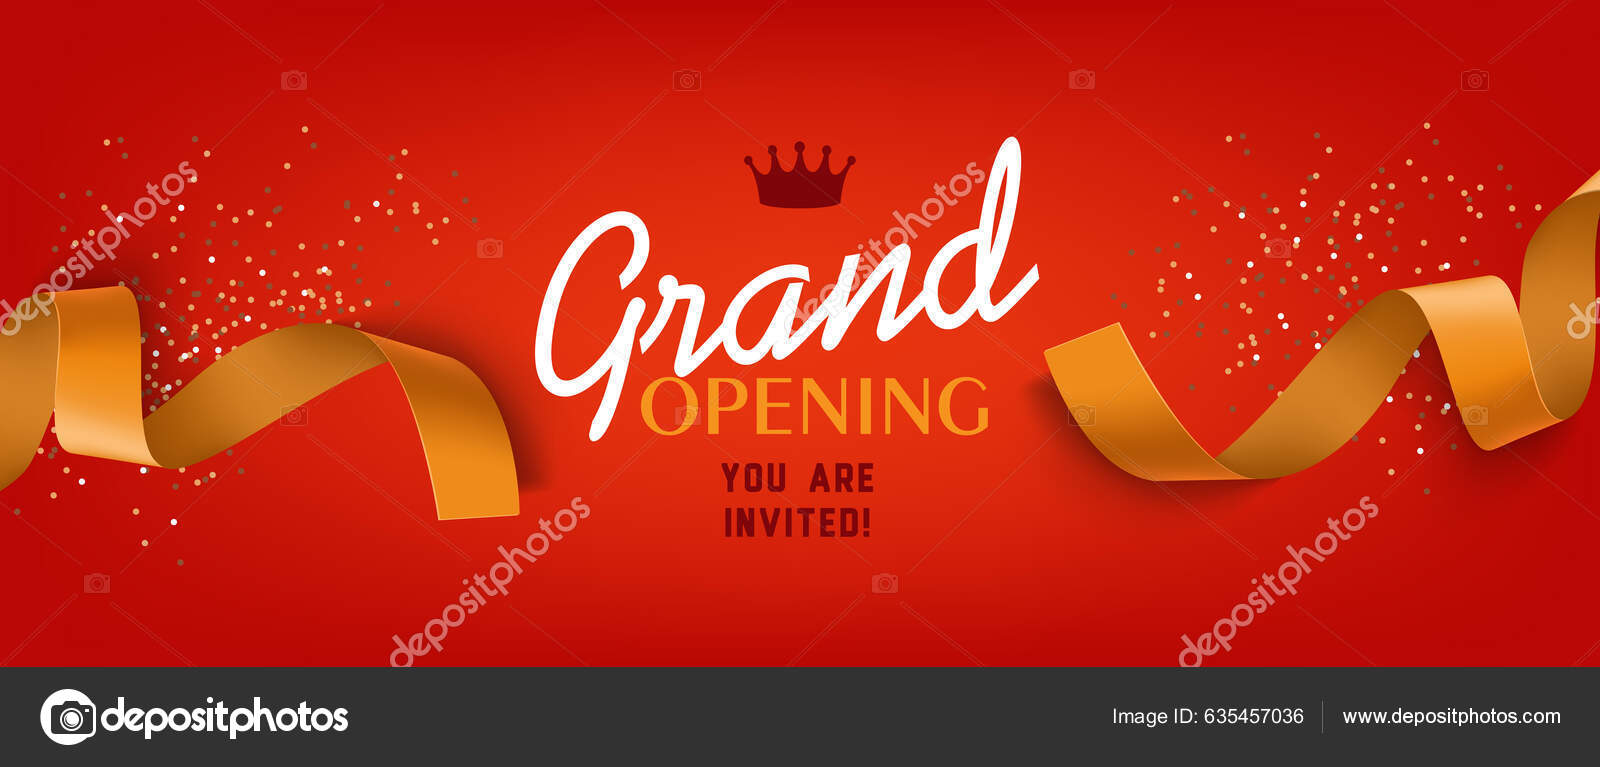 Grand opening banner with confetti Royalty Free Vector Image